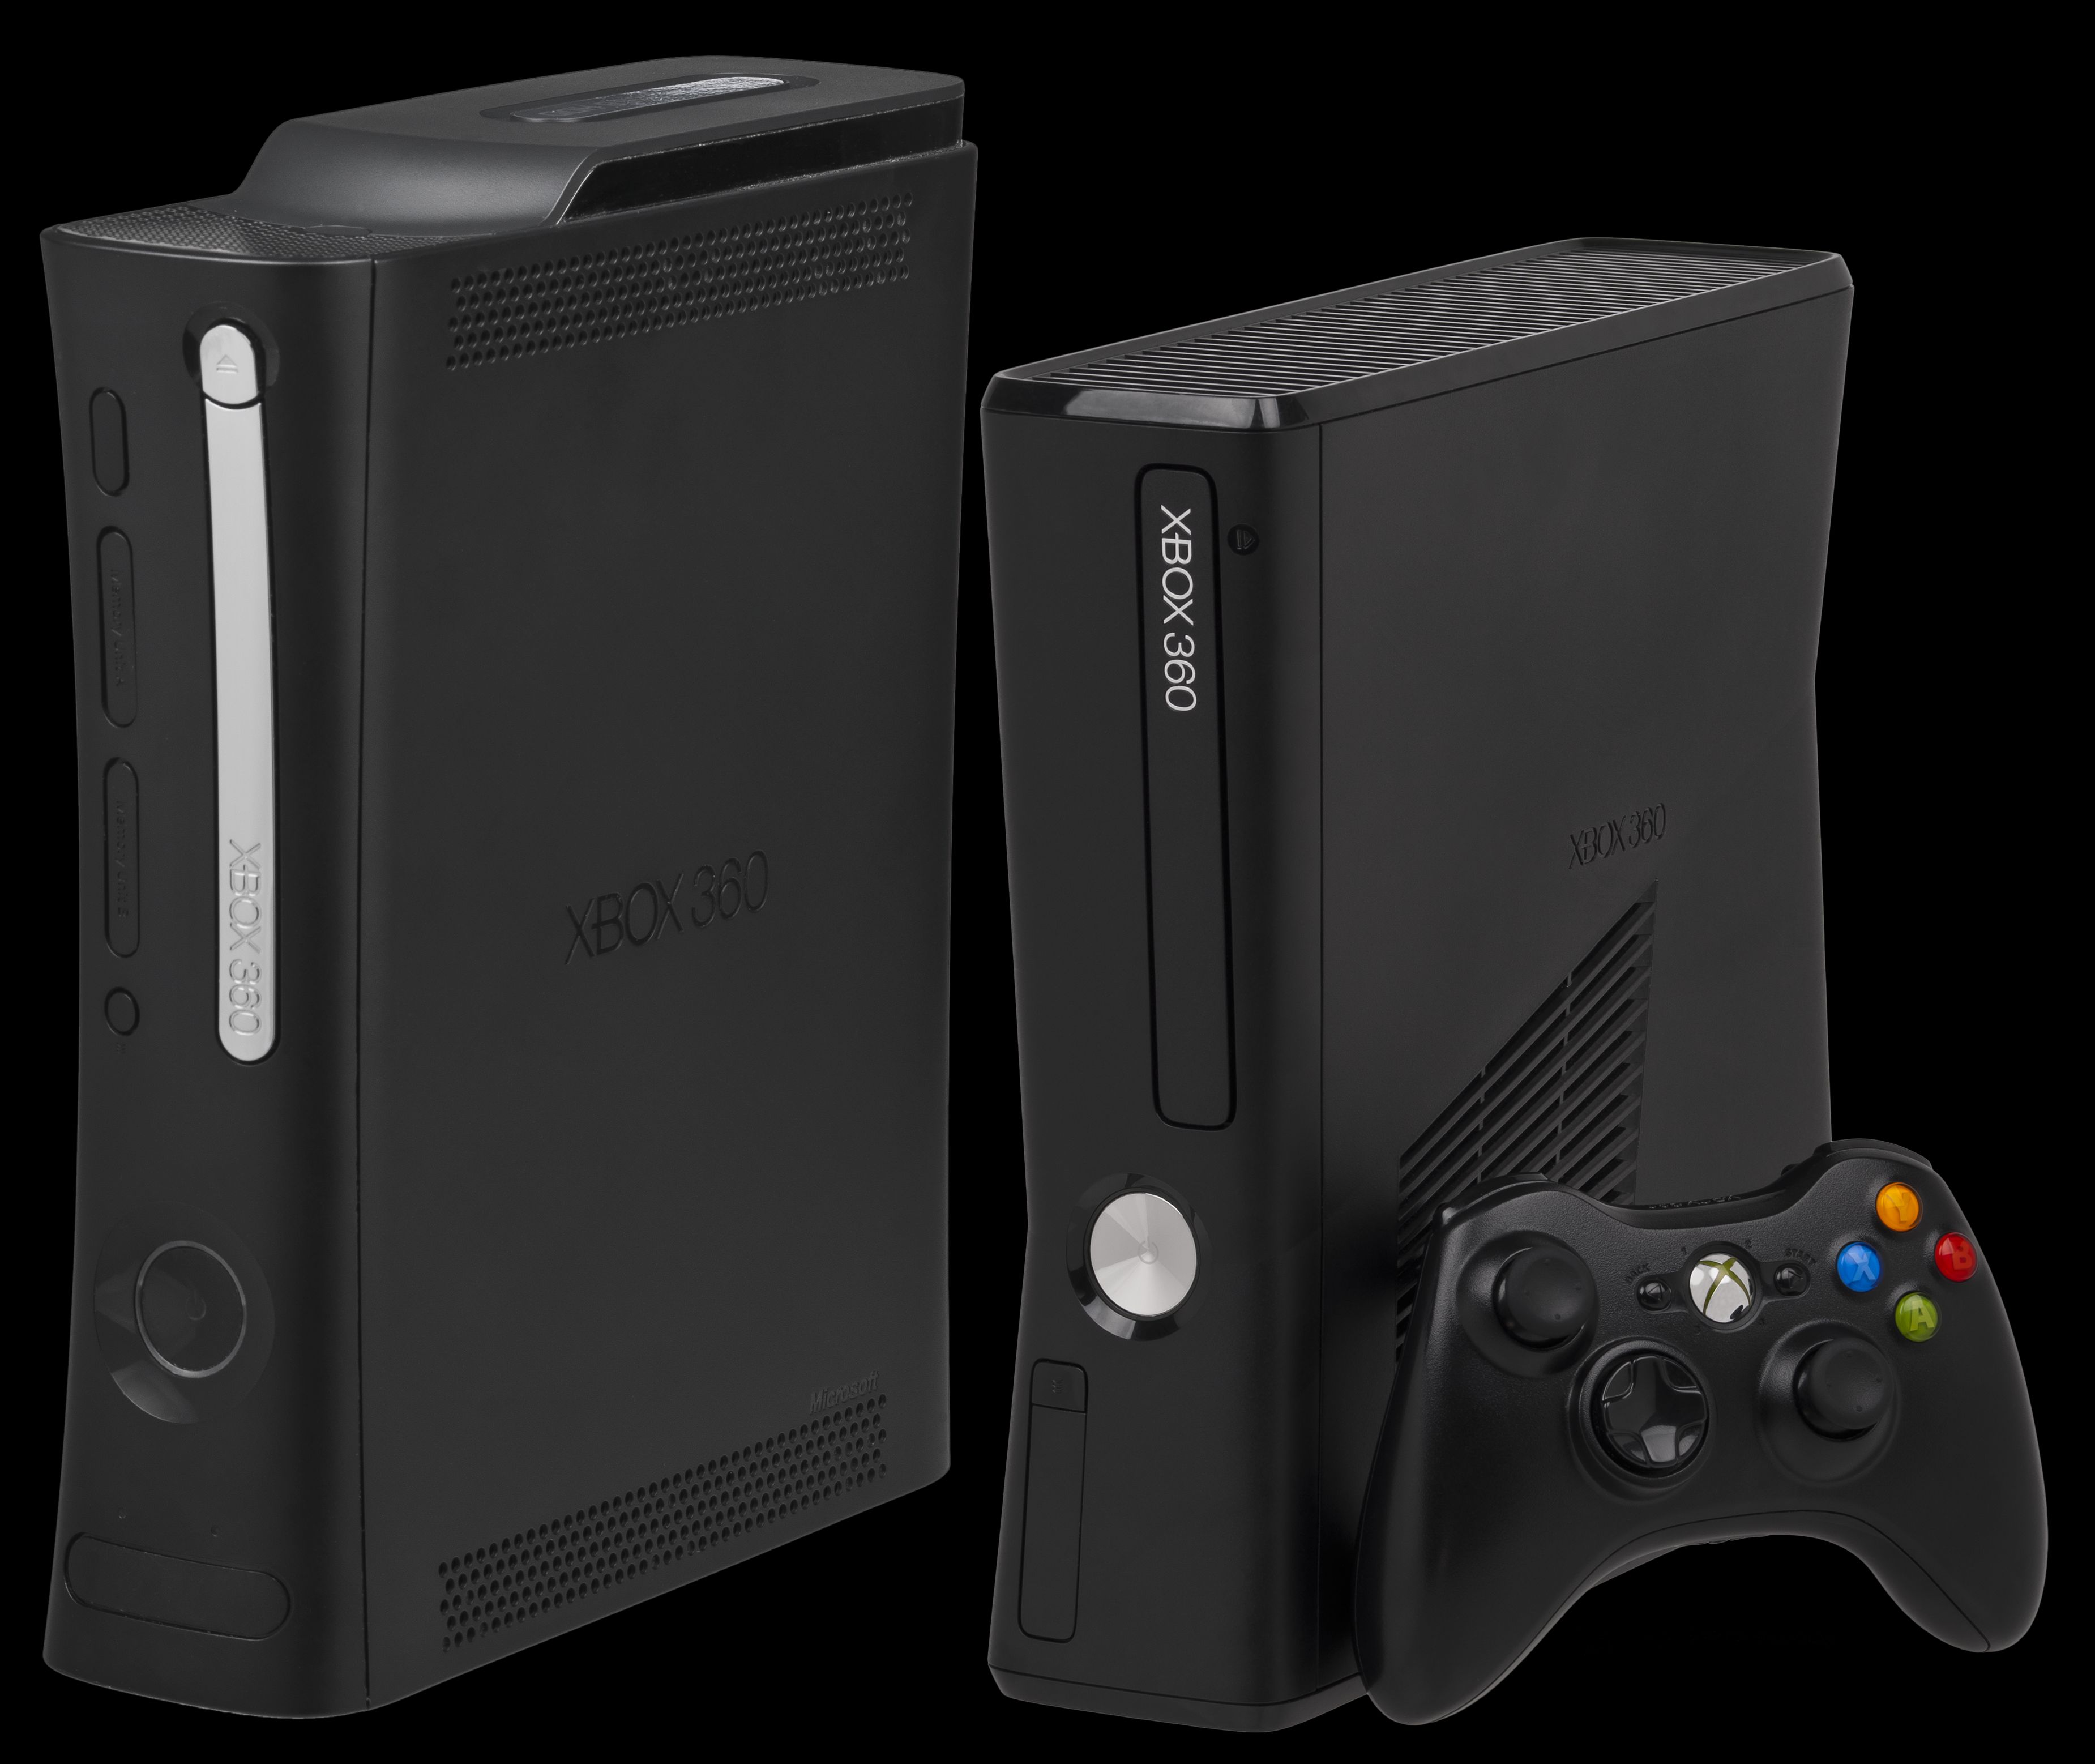 Microsoft is killing off the Xbox 360 after 10 years - but Xbox